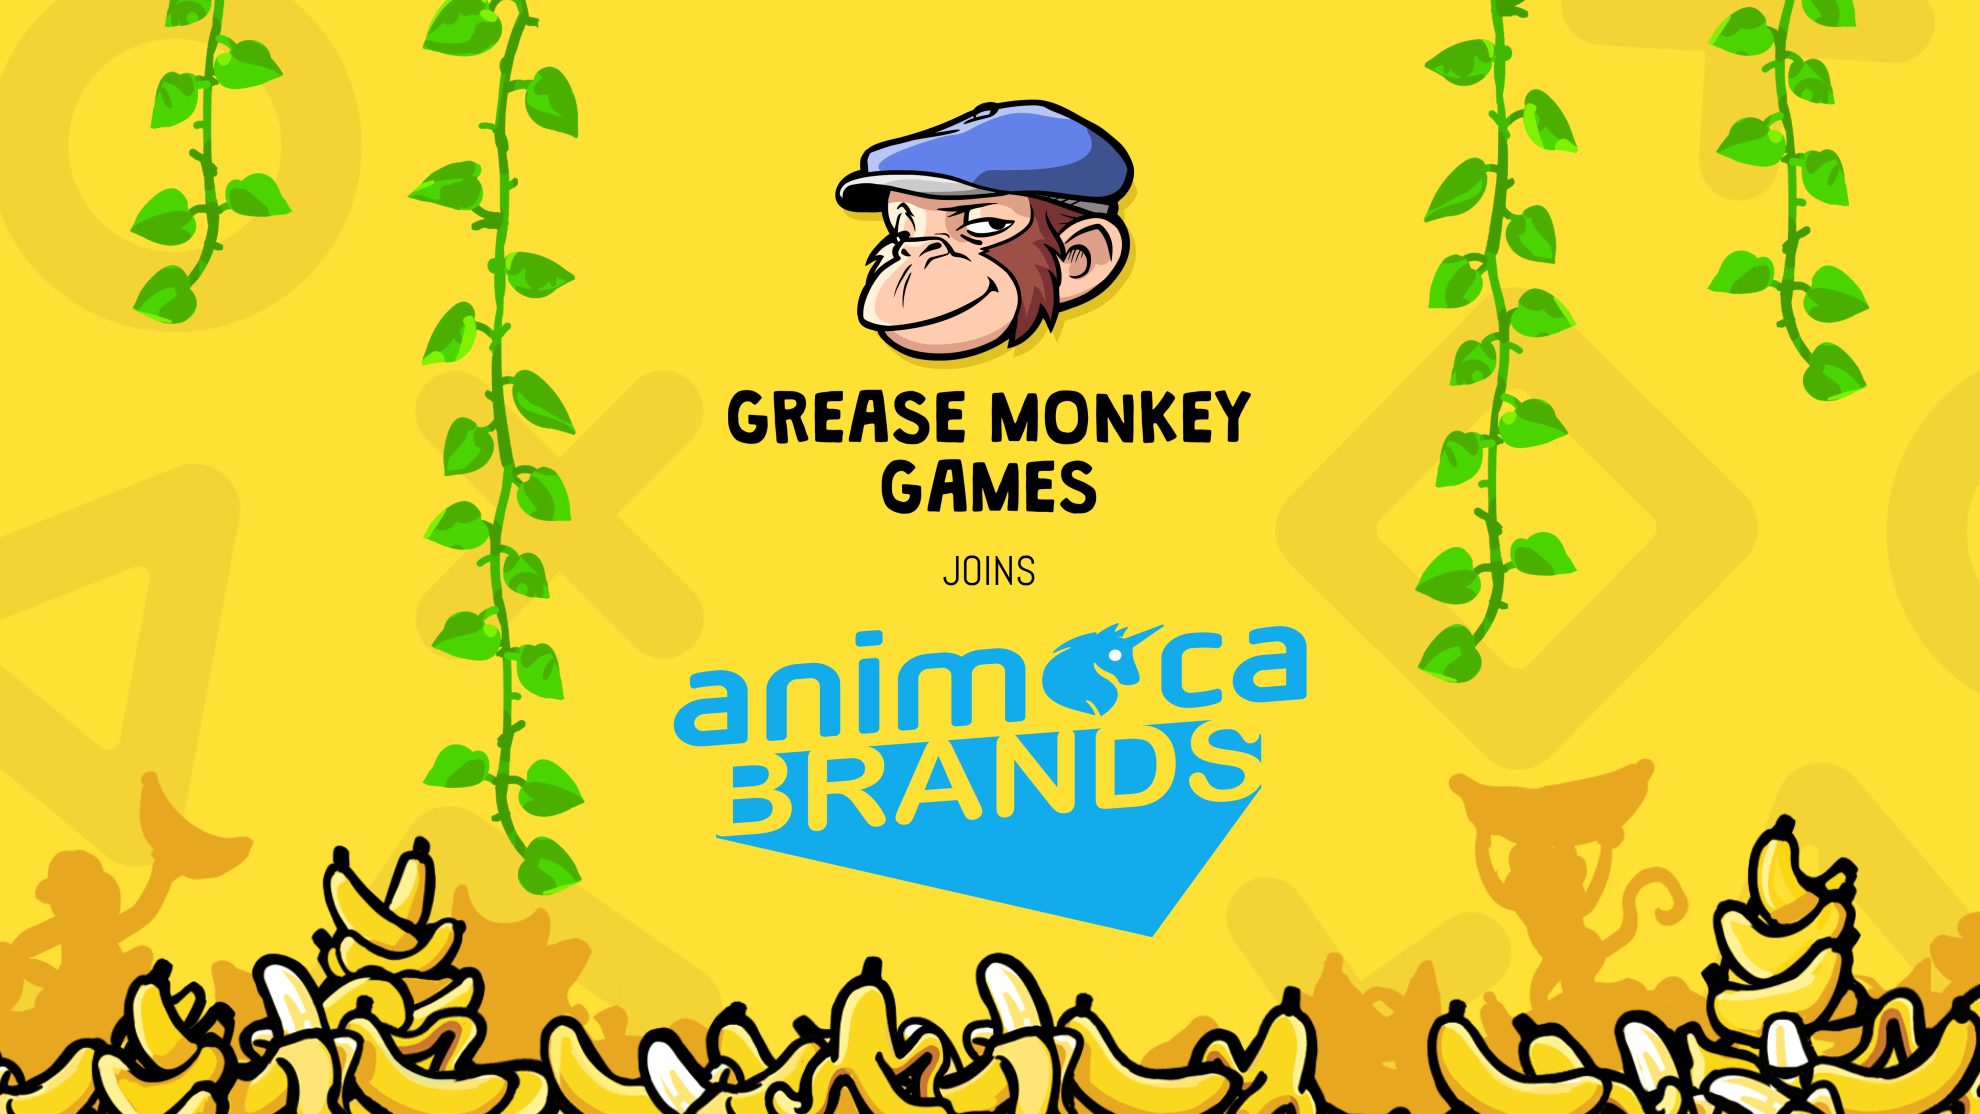 Animoca Brands acquires indie game developer Grease Monkey Games